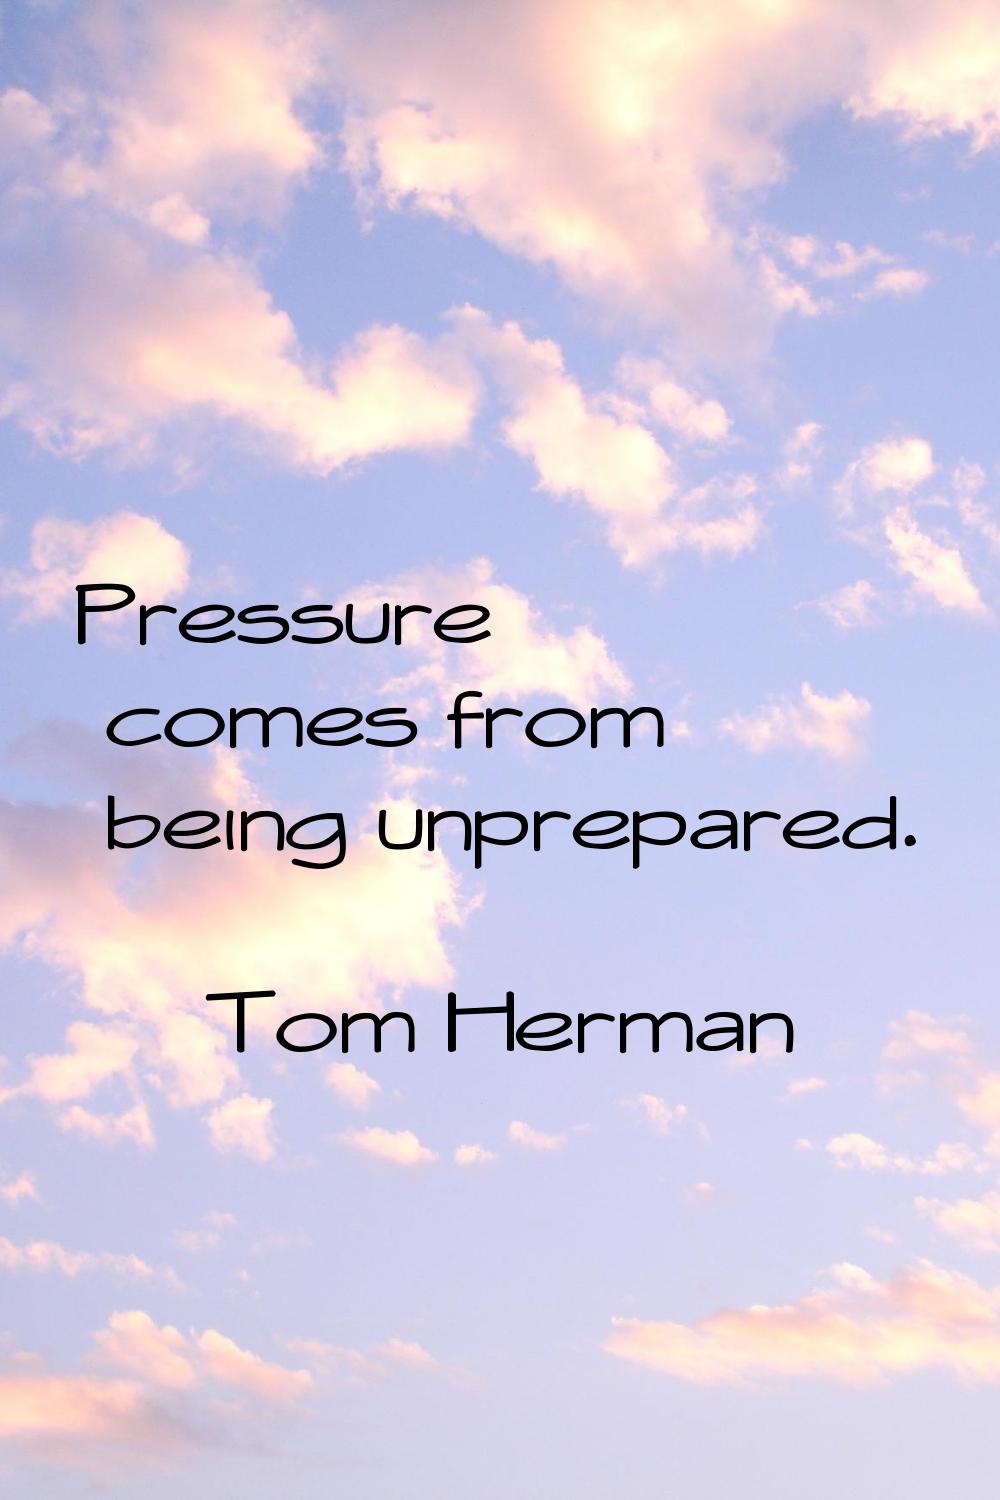 Pressure comes from being unprepared.